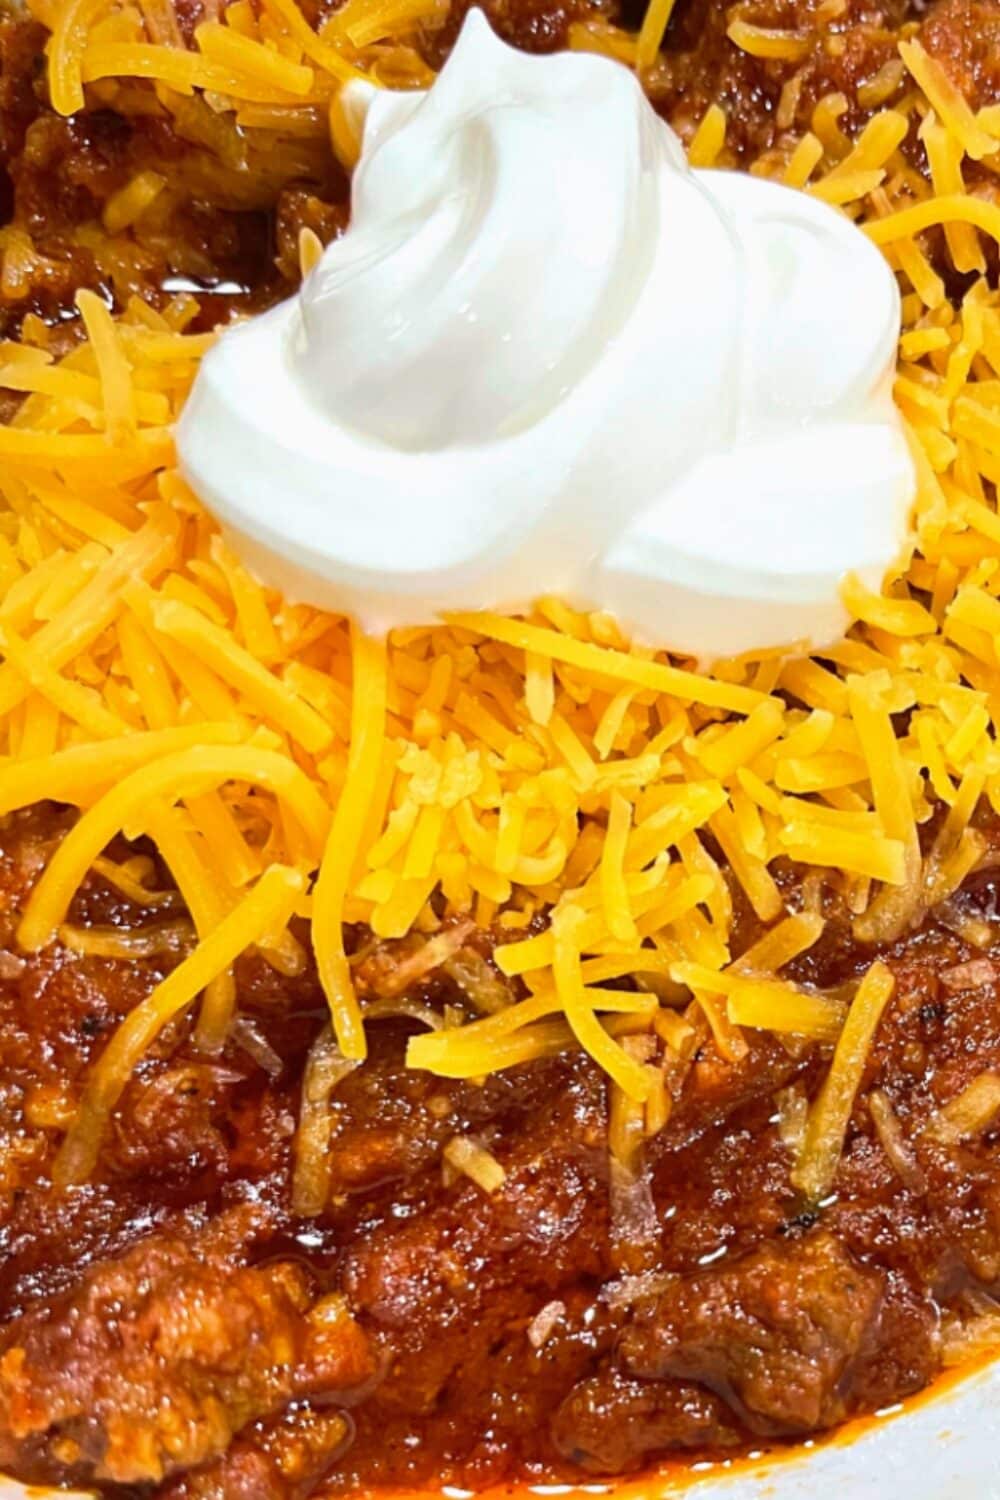 "Steaming bowl of hearty keto chili, generously topped with a golden layer of melted cheese and a dollop of creamy sour cream. The chili features tender chunks of meat, vibrant bell peppers, and rich spices, creating a warm and comforting dish perfect for a satisfying low-carb meal.